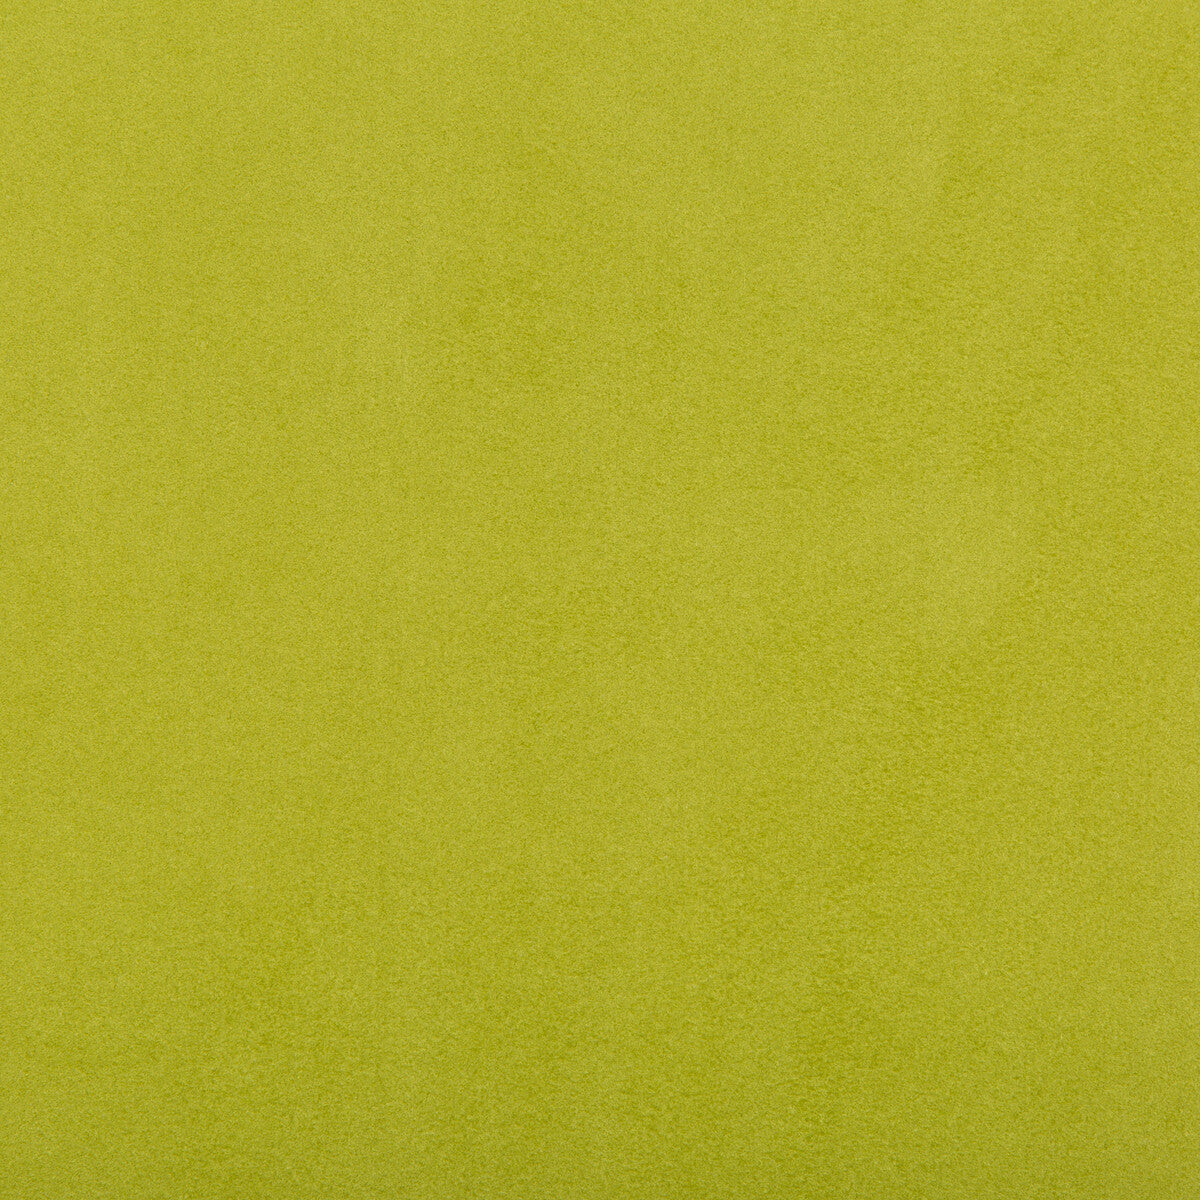 Ultimate fabric in key lime color - pattern 960122.333.0 - by Lee Jofa in the Ultimate Suede collection